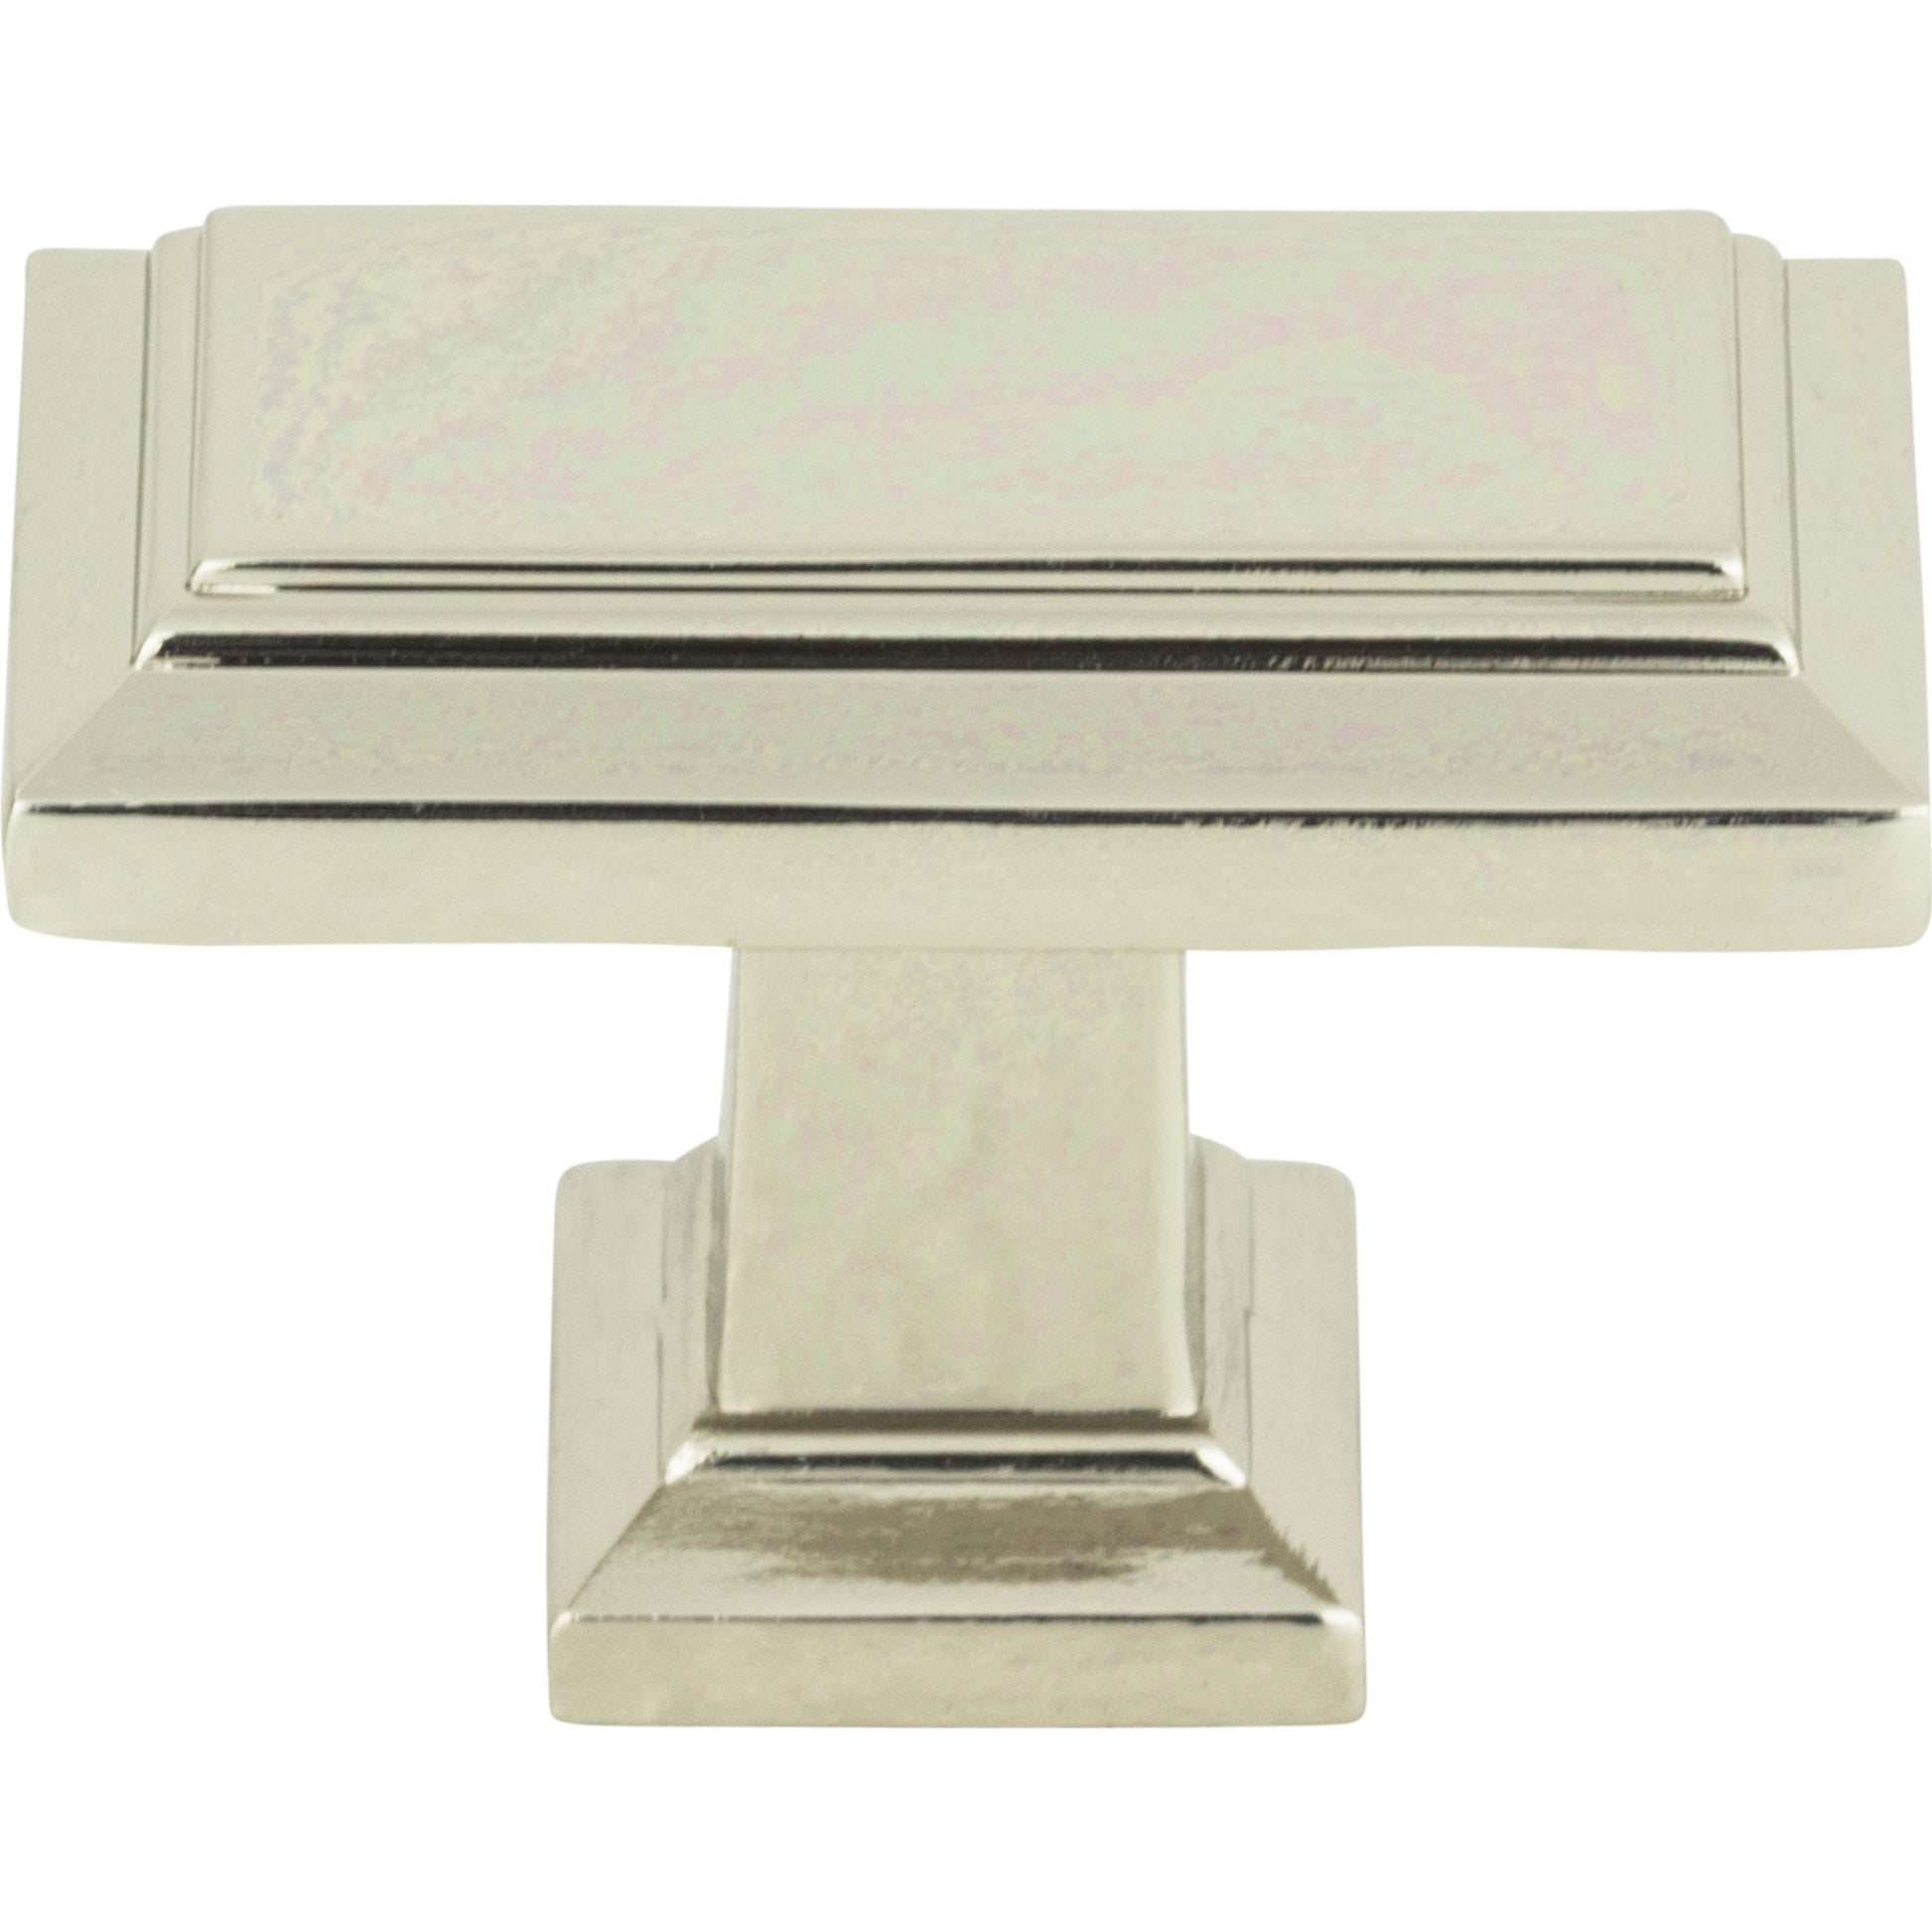 ATLAS 290-PN Sutton Place Rectangle Knob 1 7/16 Inch Polished Nickel